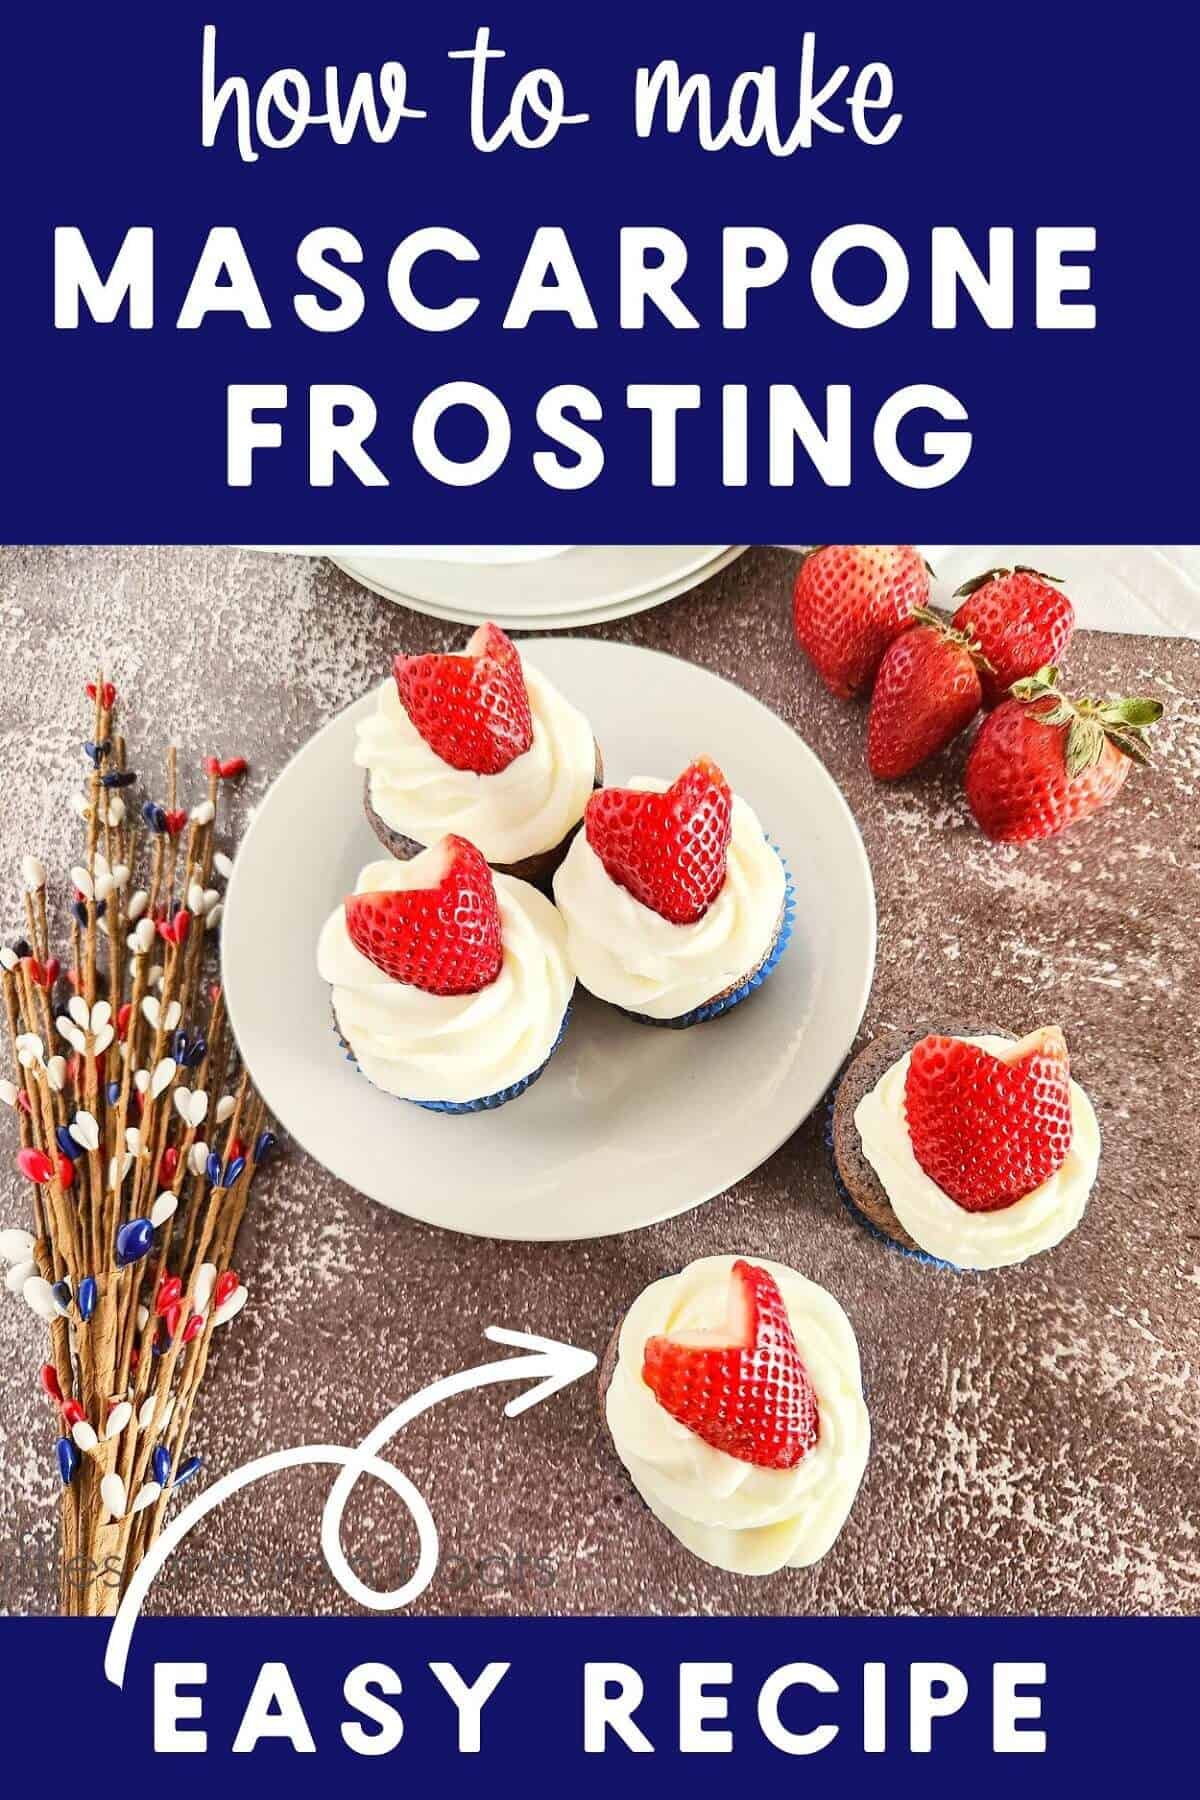 A plate of frosted blueberry cupcakes with strawberries on top, next to 2 other cupcakes and a bunch of fresh strawberries, next to holiday decorations against a brown background.